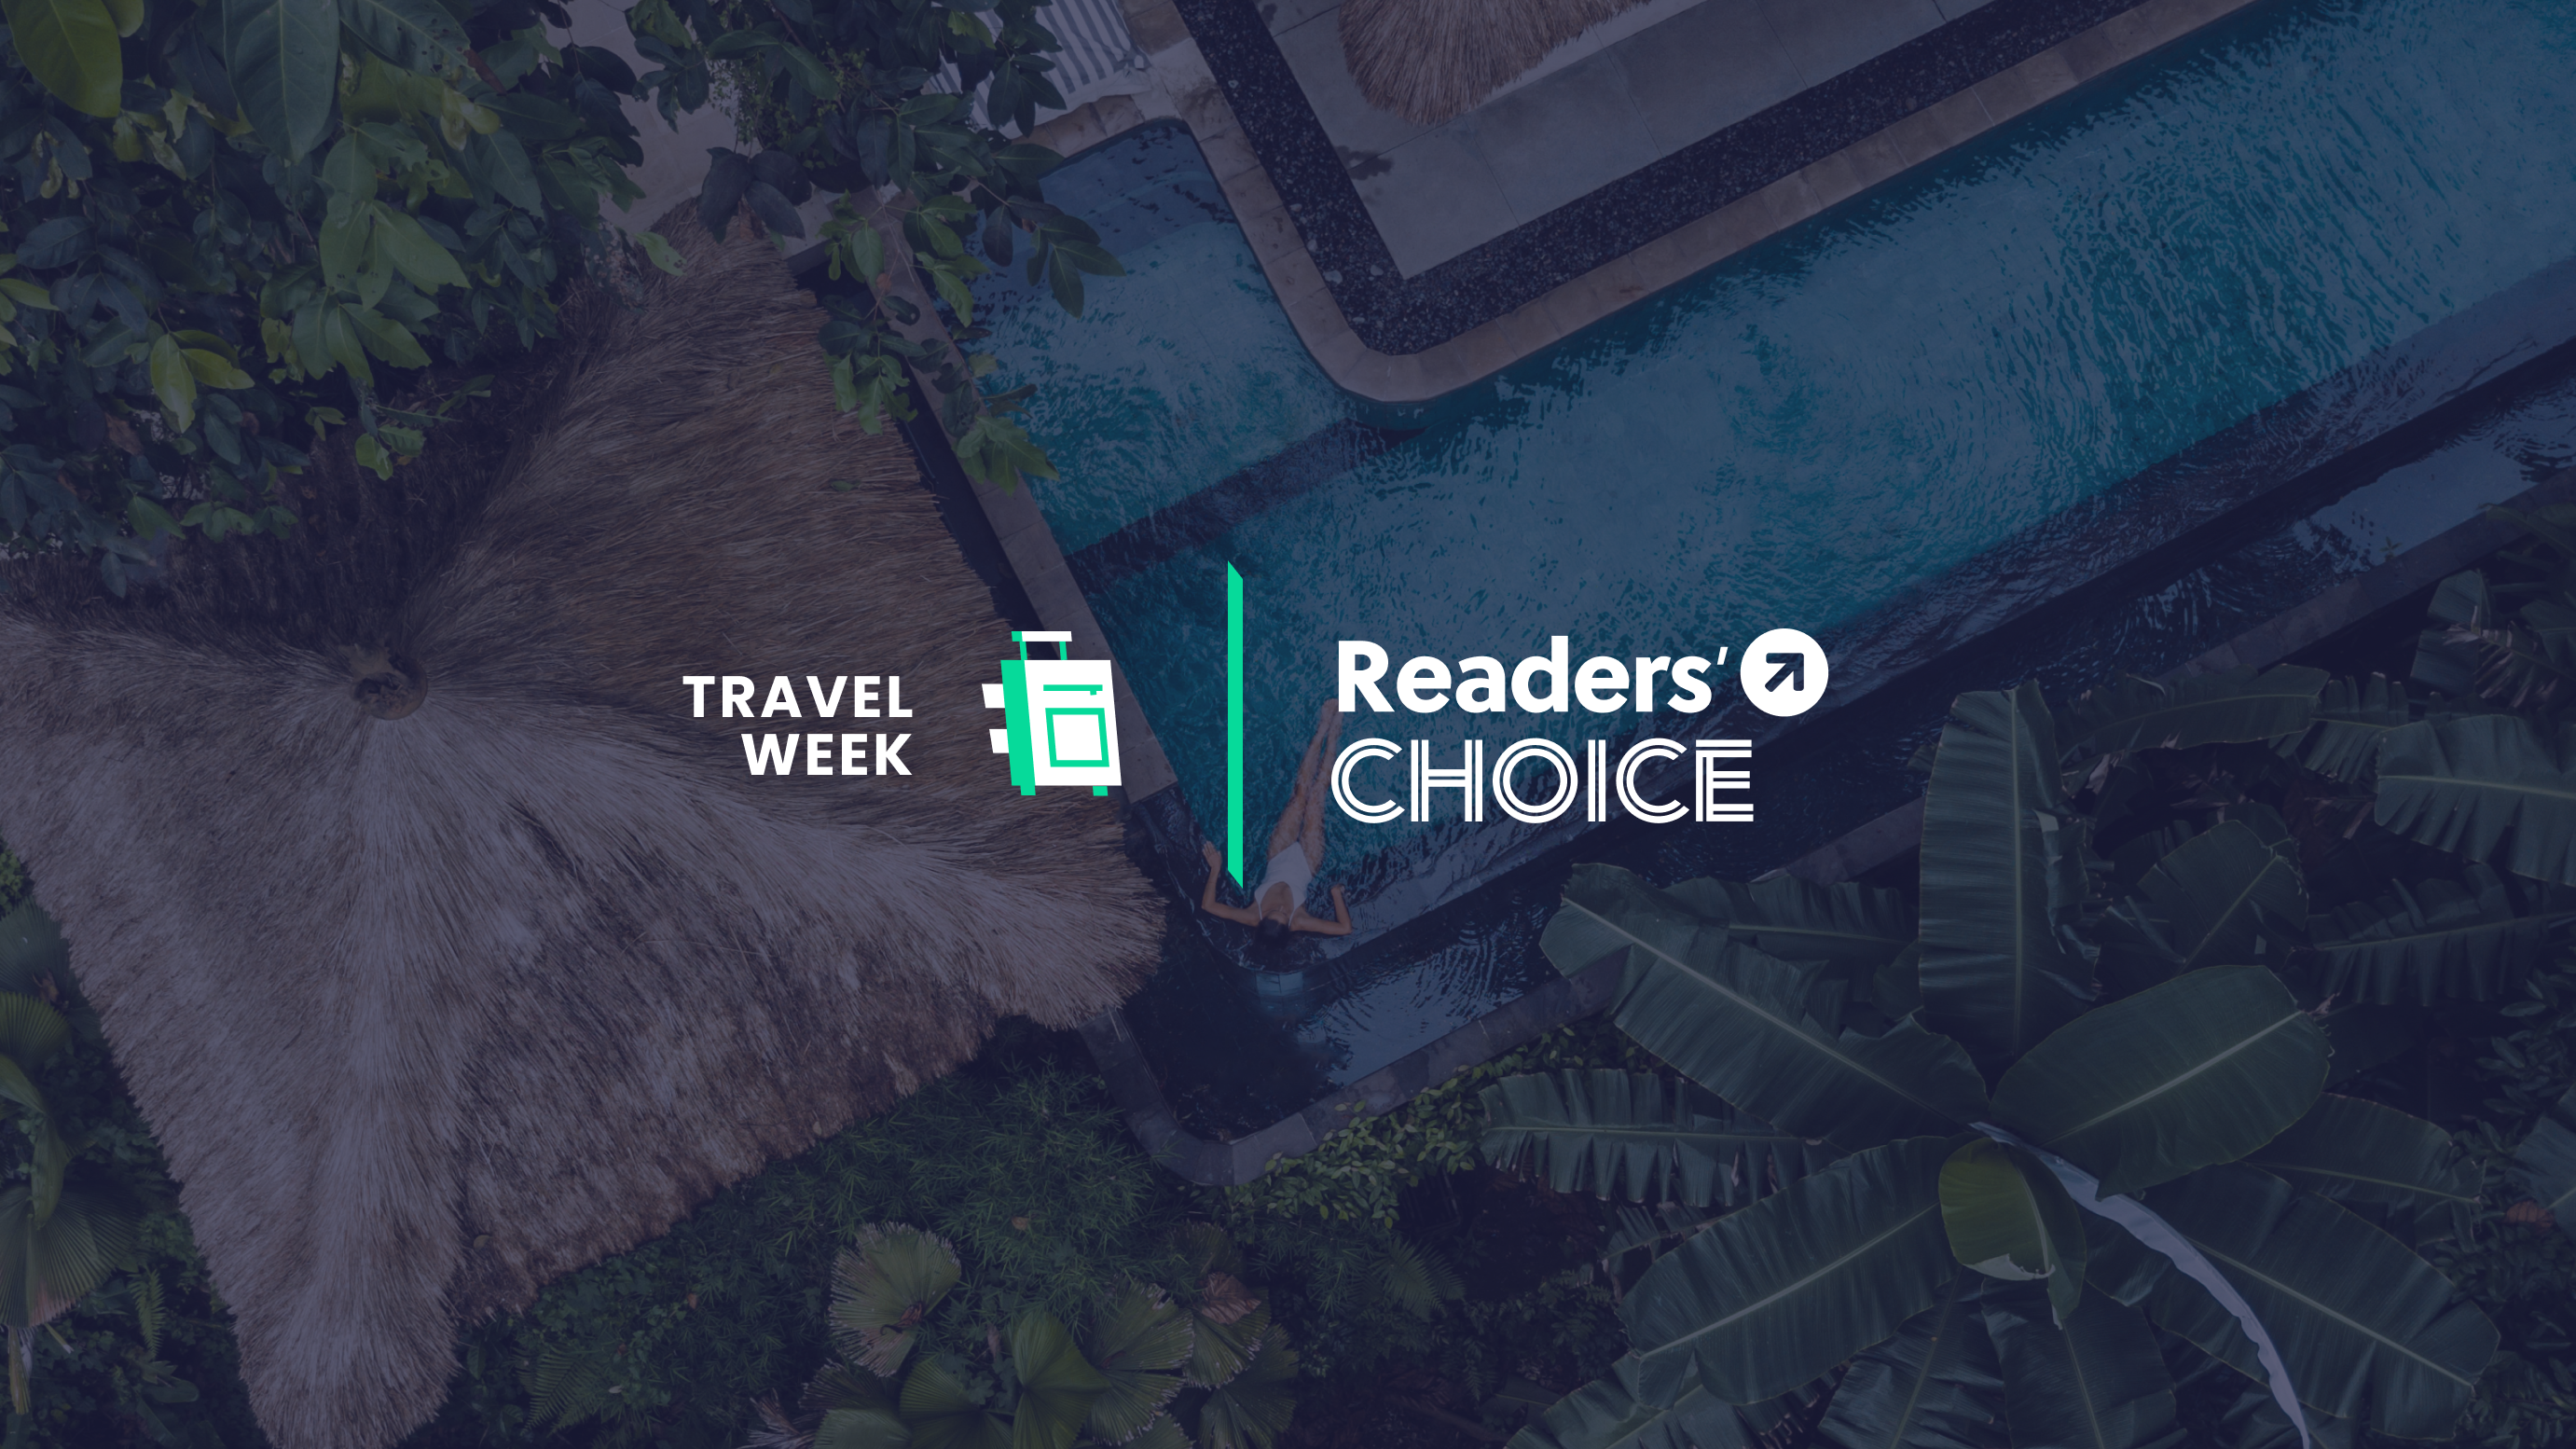 Featured image for Readers' Choice awards during Travel Week at the 2021 TPG Awards